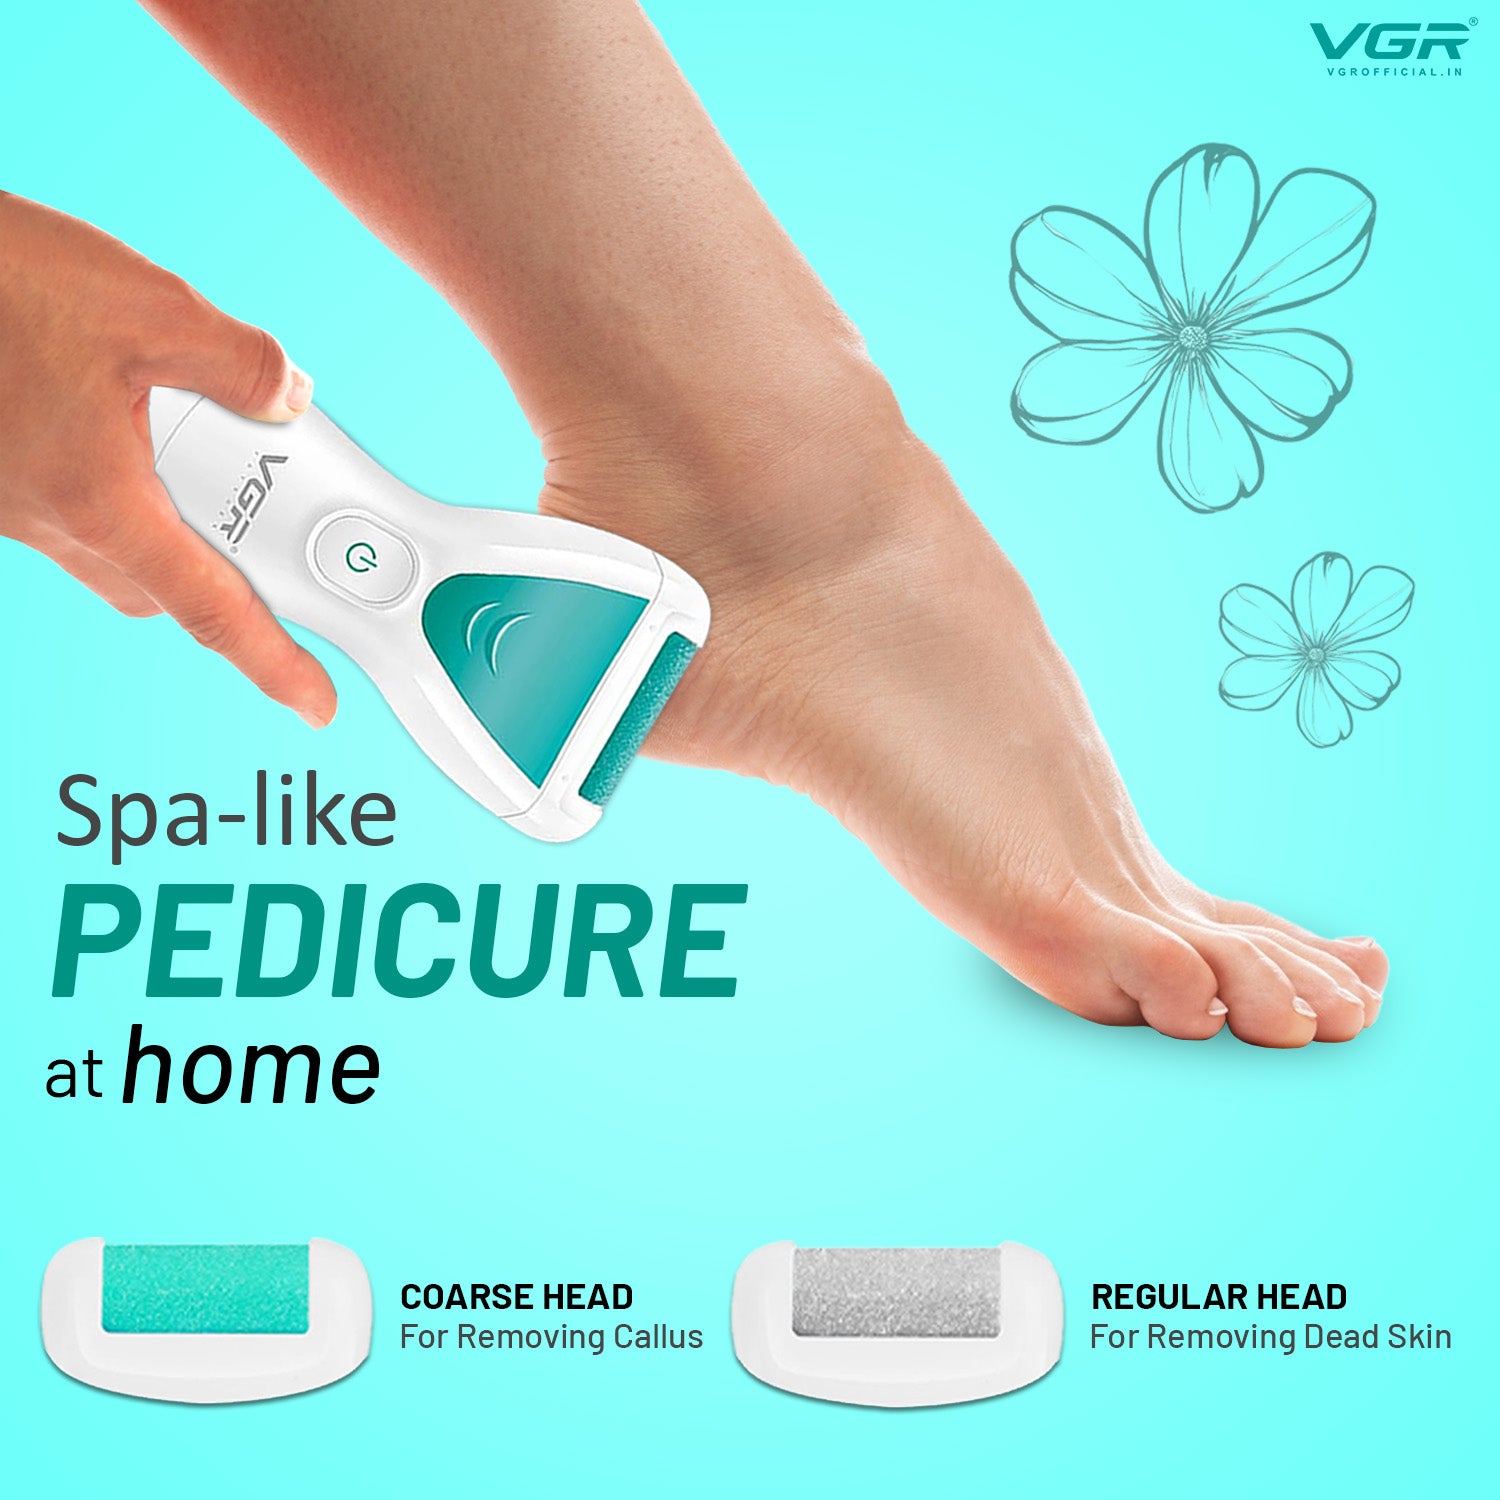 VGR V-812 2 In 1 Professional IPX 6 Waterproof Callus Remover